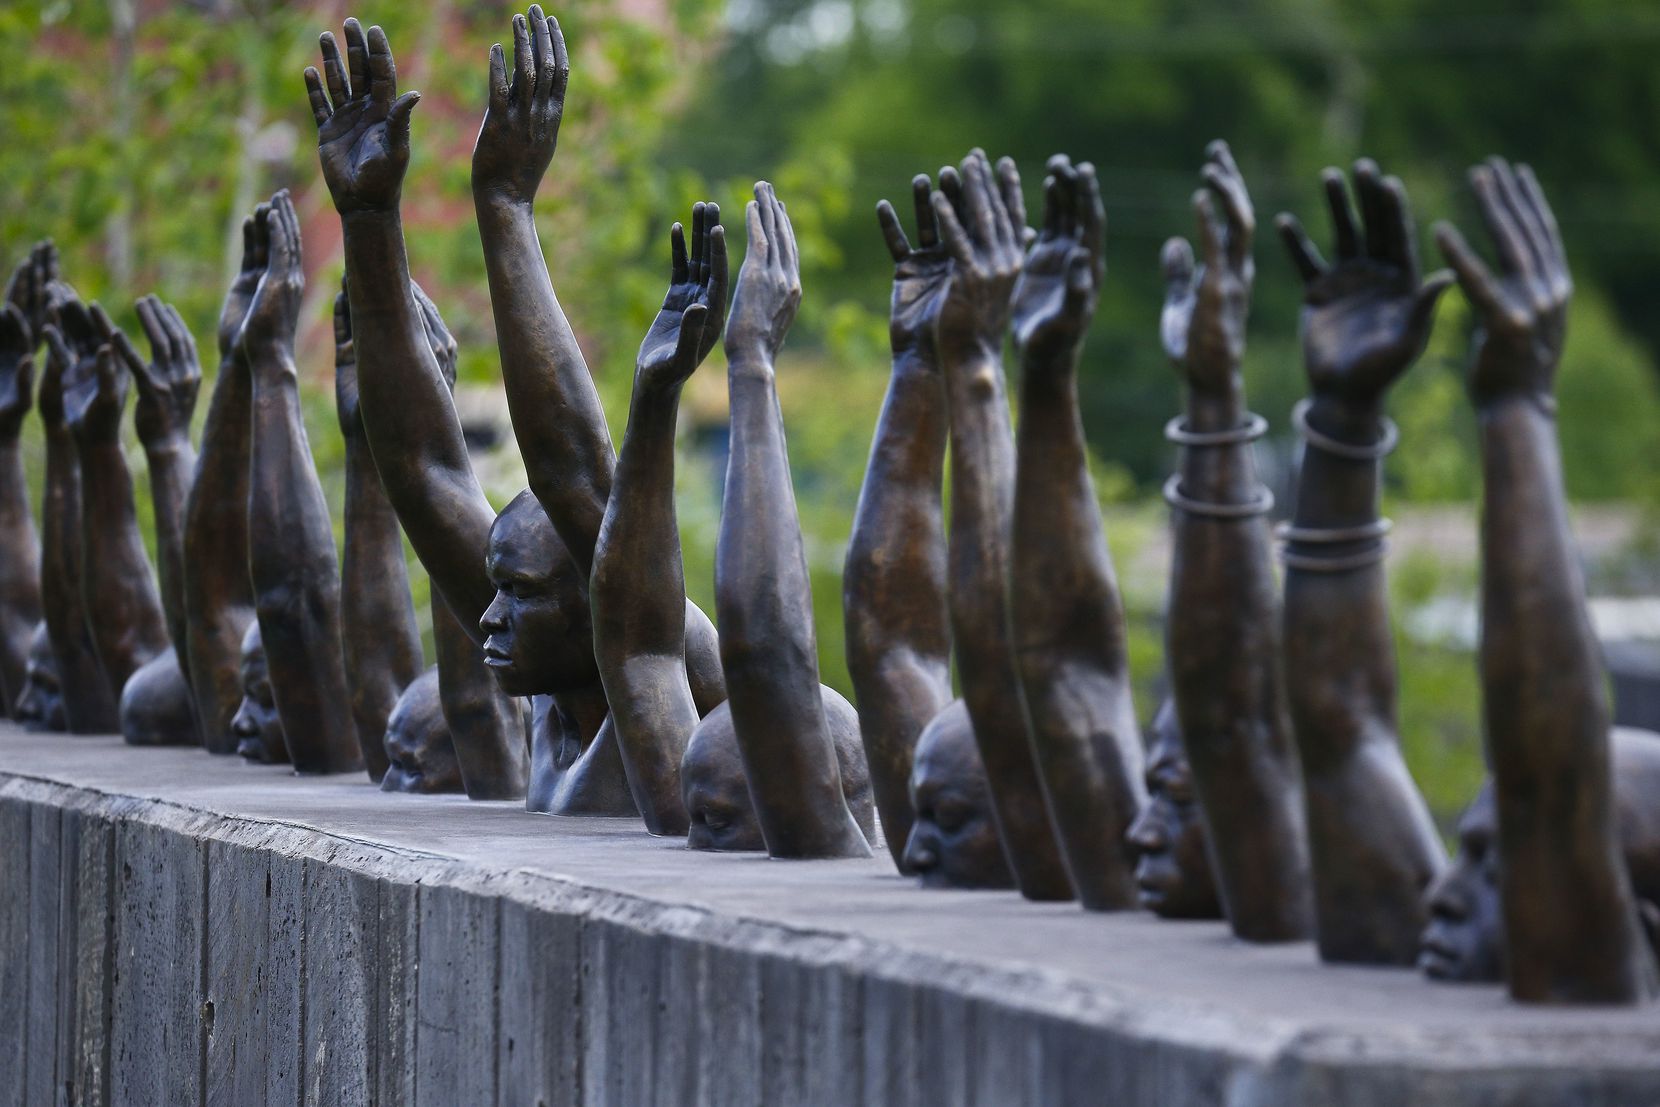 The bronze sculpture Raise Up by Hank Willis Thomas addresses police violence against...